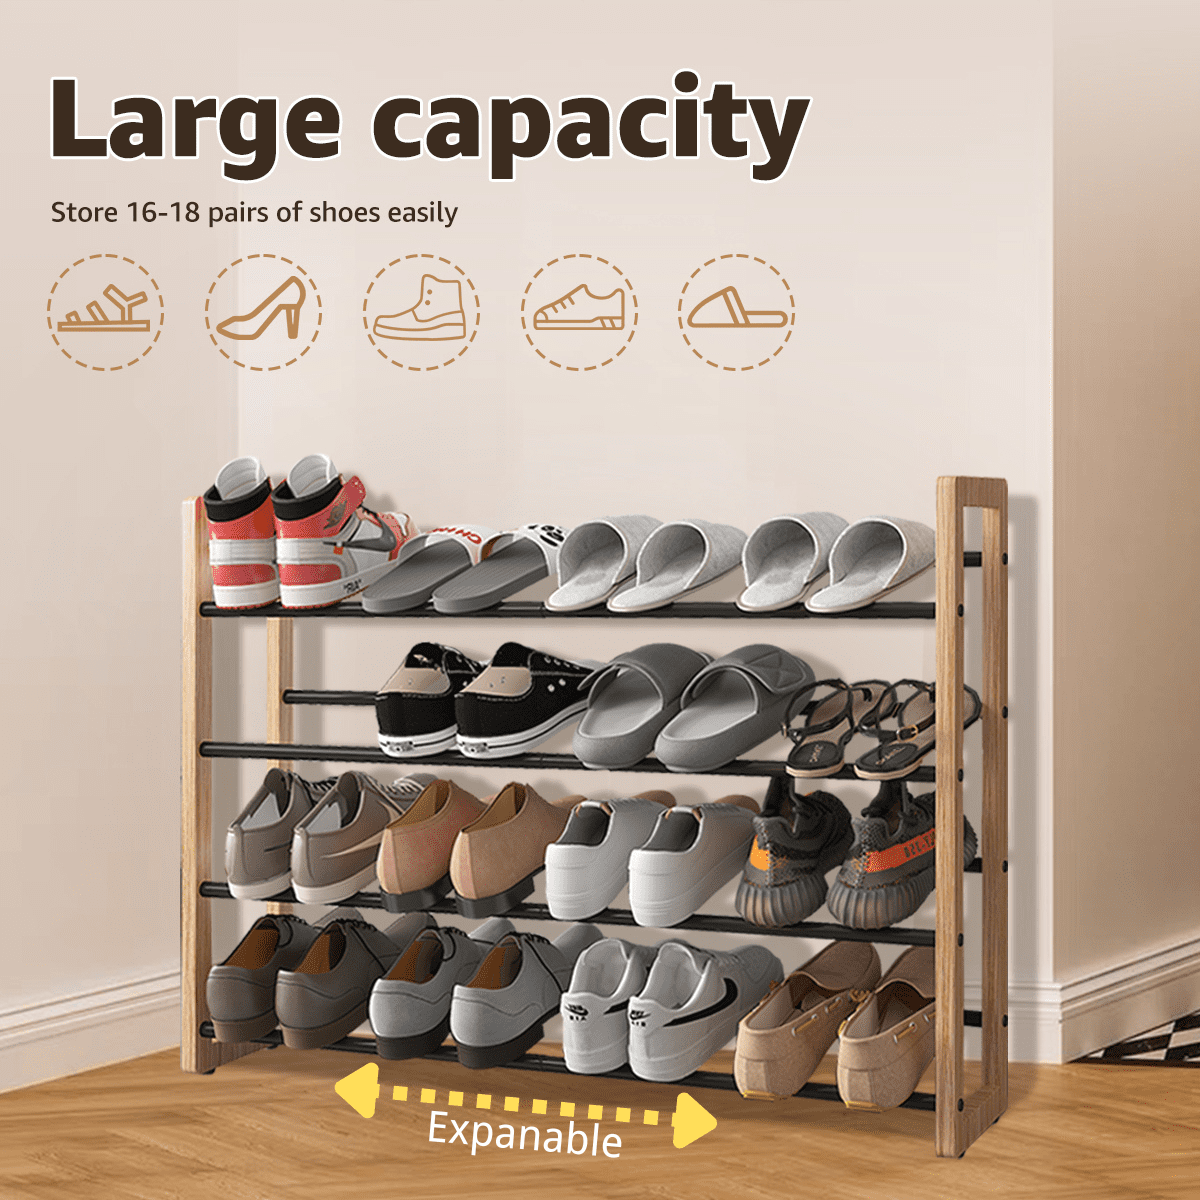 4-Tier Expandable Shoe Rack, Adjustable Shoes Organizer Storage Shelf,  Wooden and Metal Free Standing Shoe Rack for Closet Entryway Doorway Garage  and